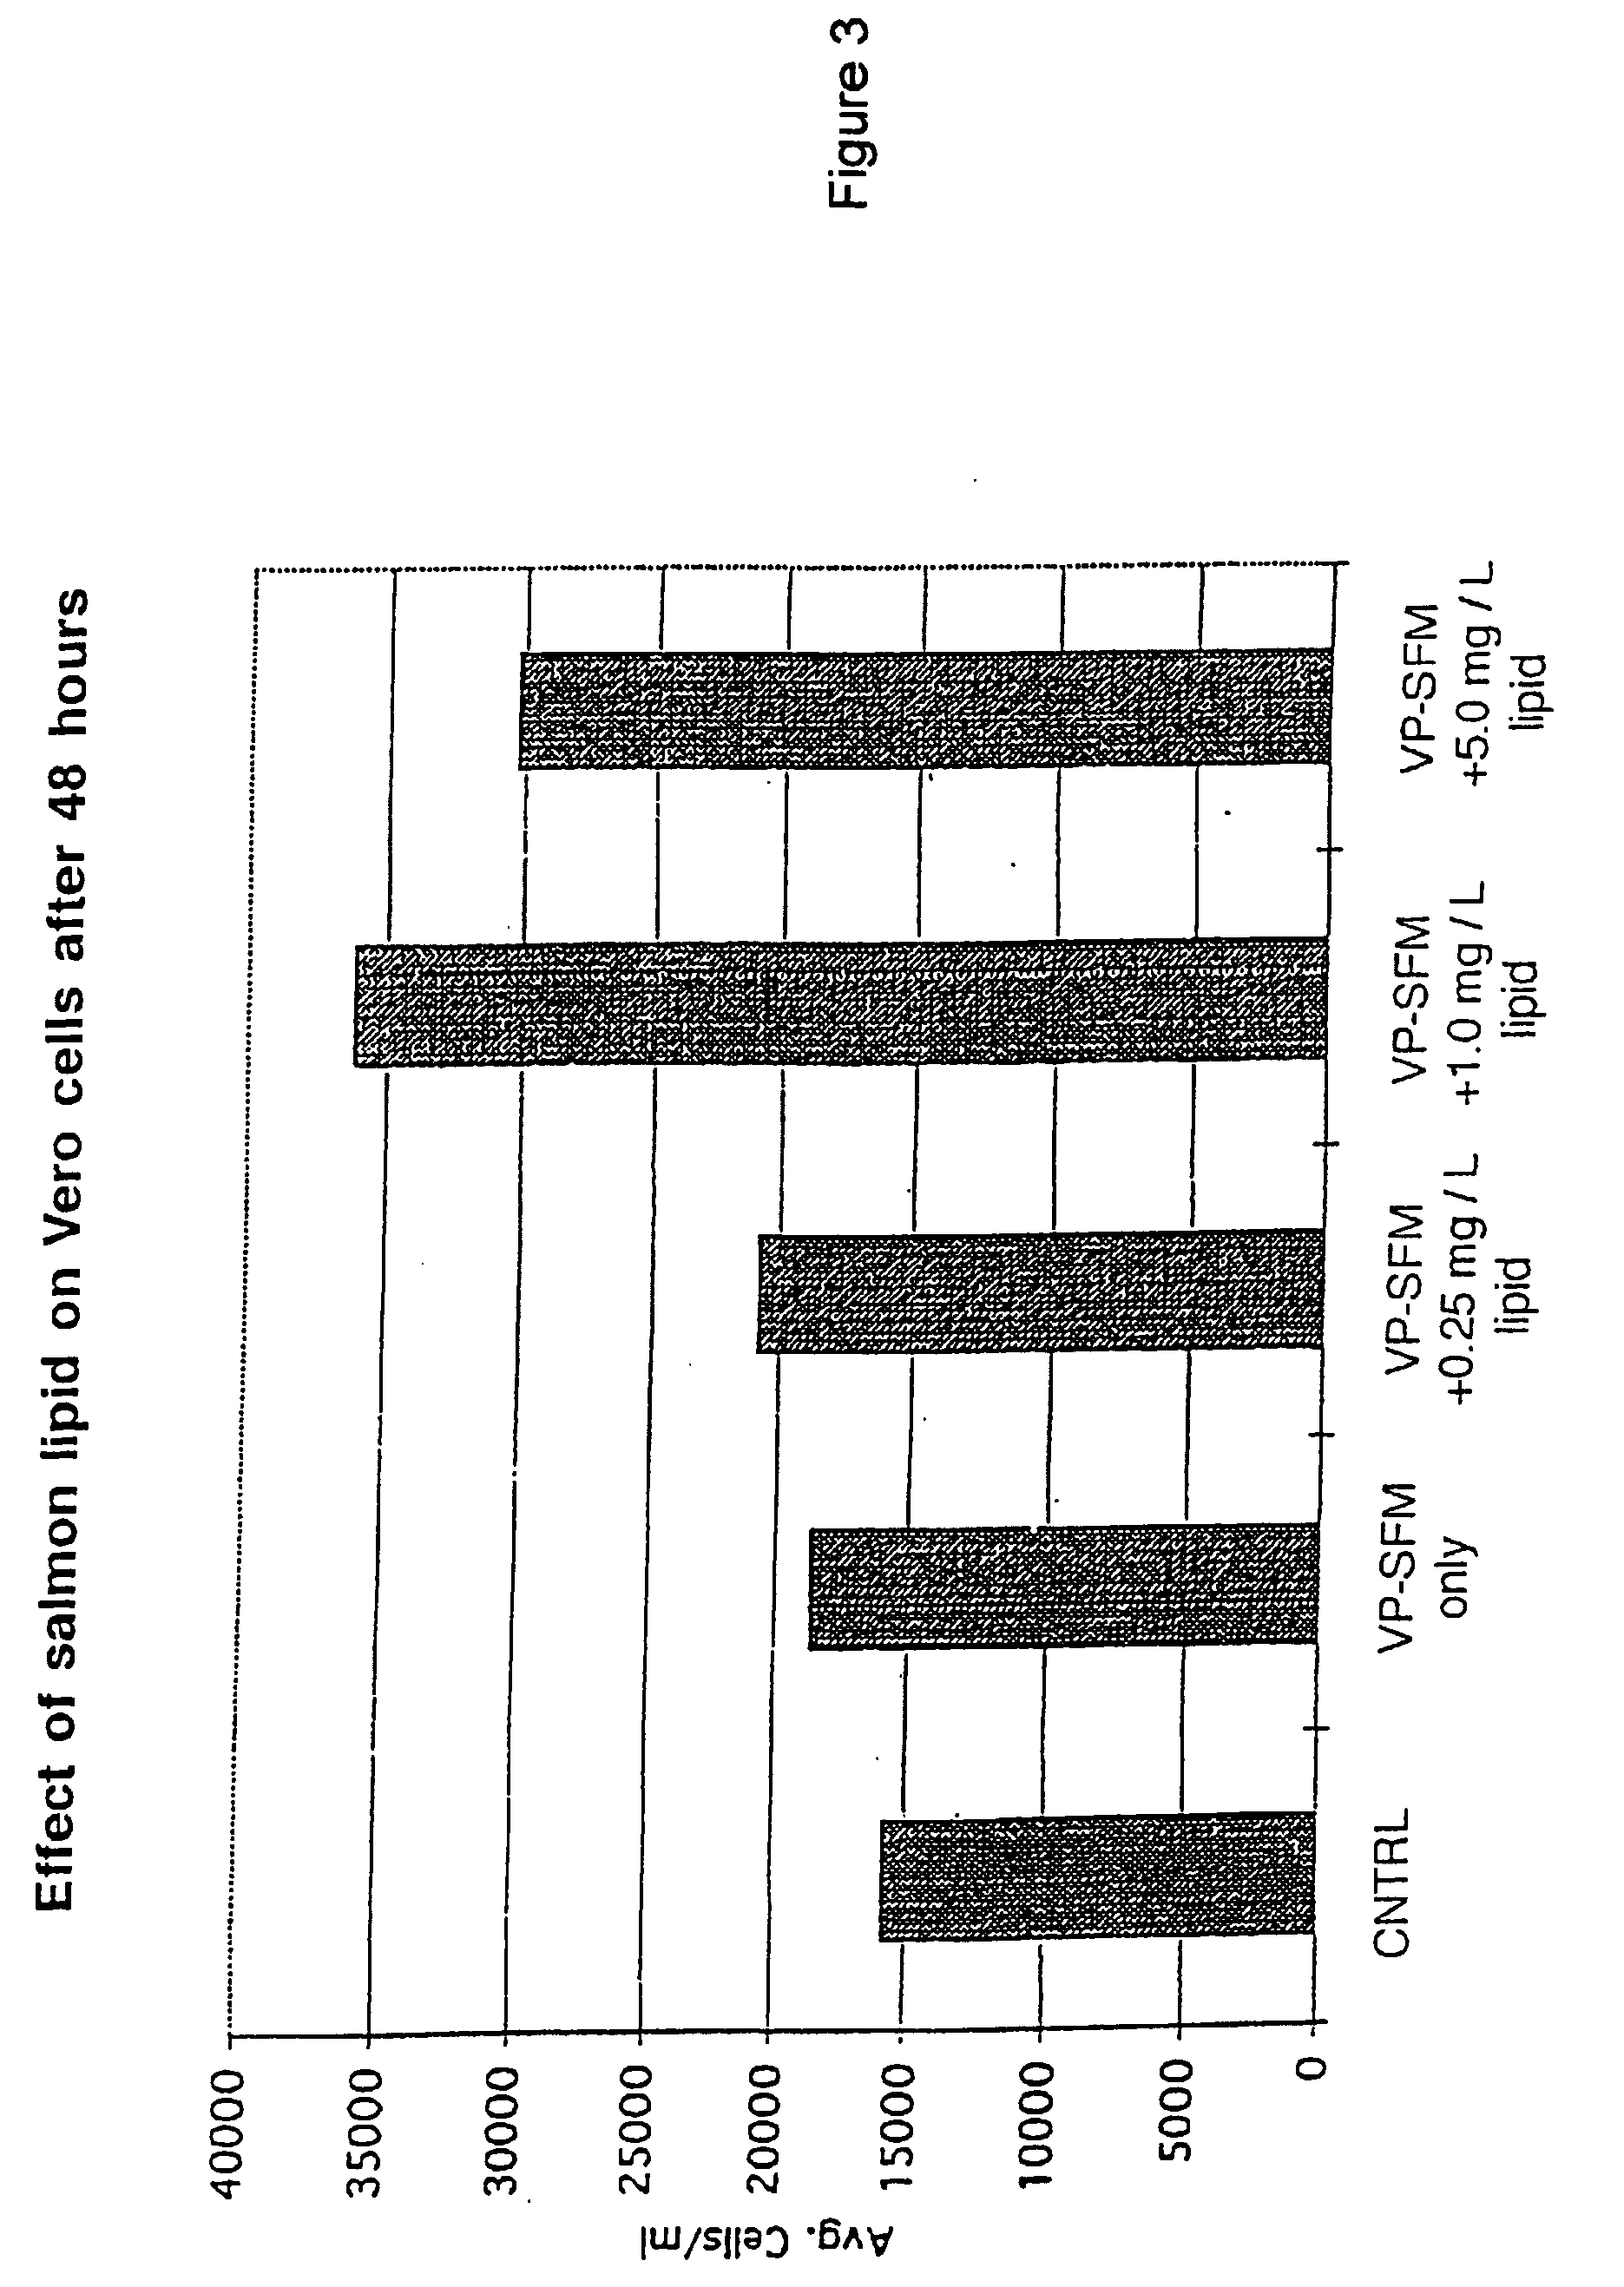 Method of using fish plasma components for tissue culture